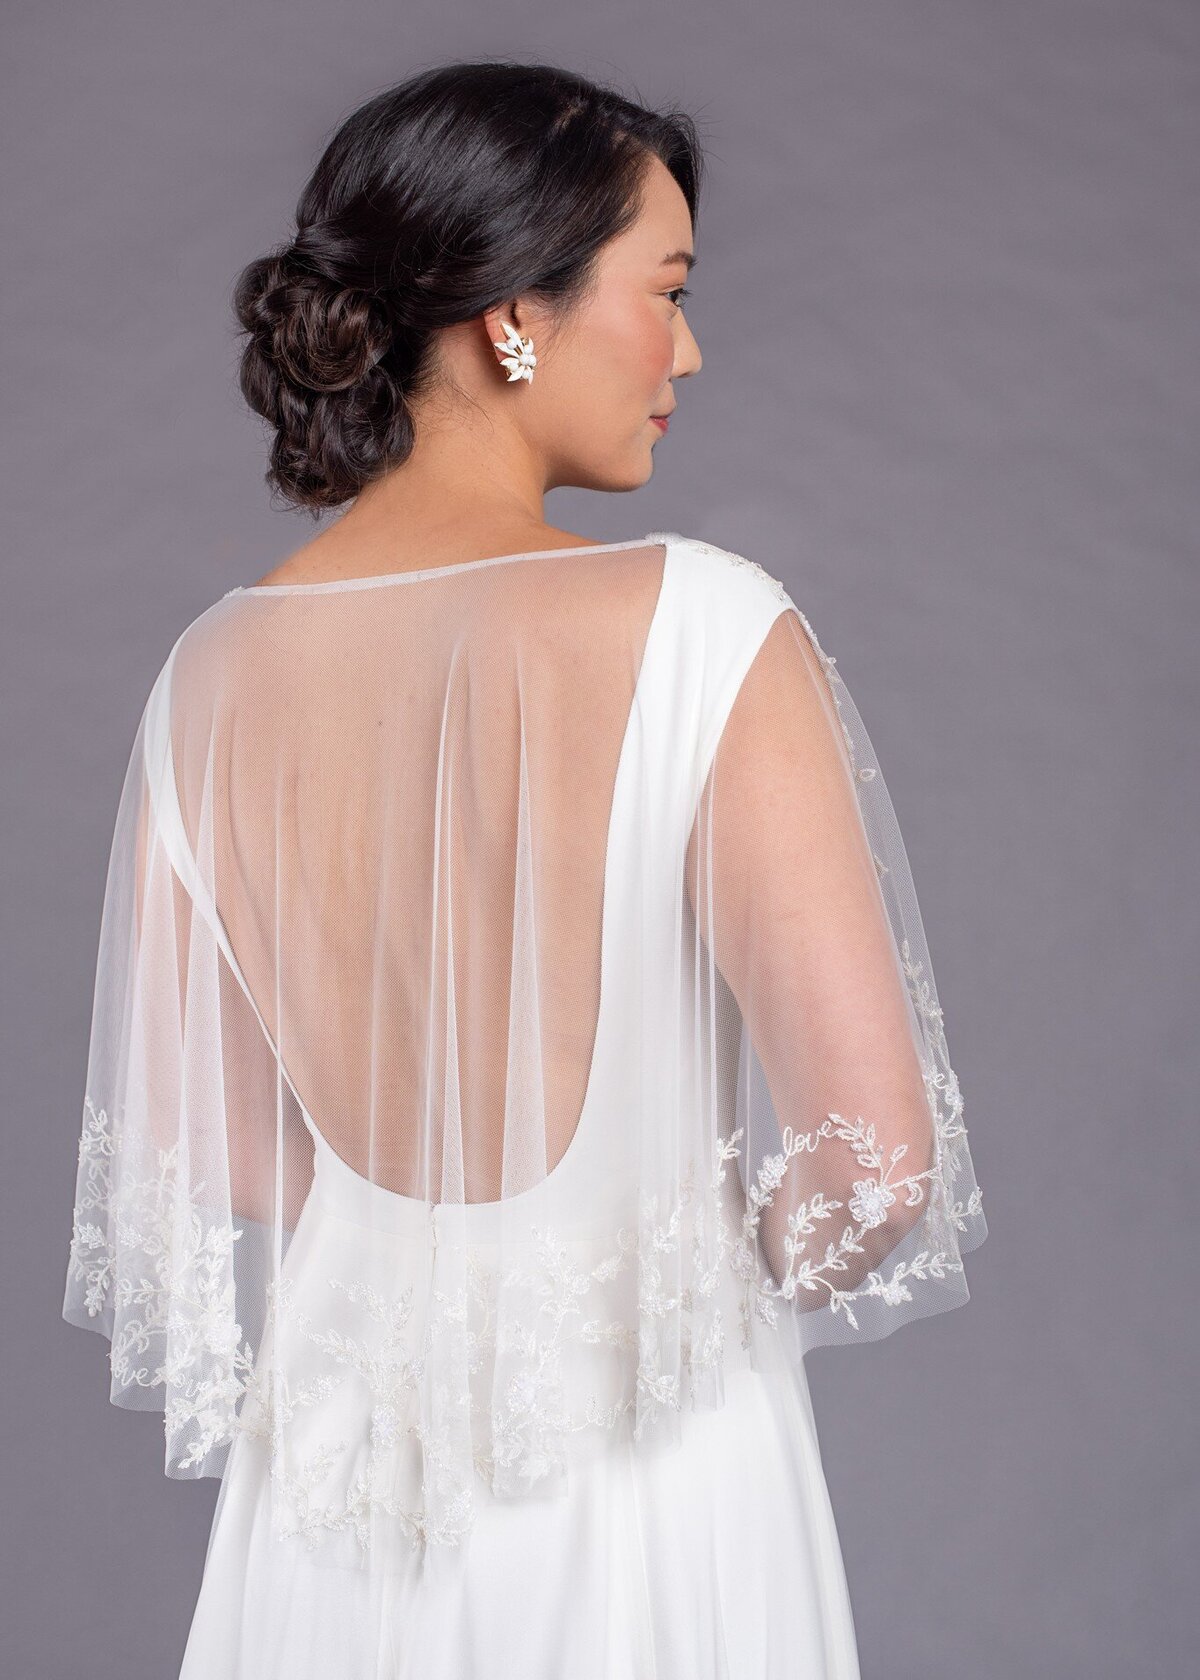 edith-elan-dolores-low-back-wedding-dress-with-detachable-beaded-bridal-cape